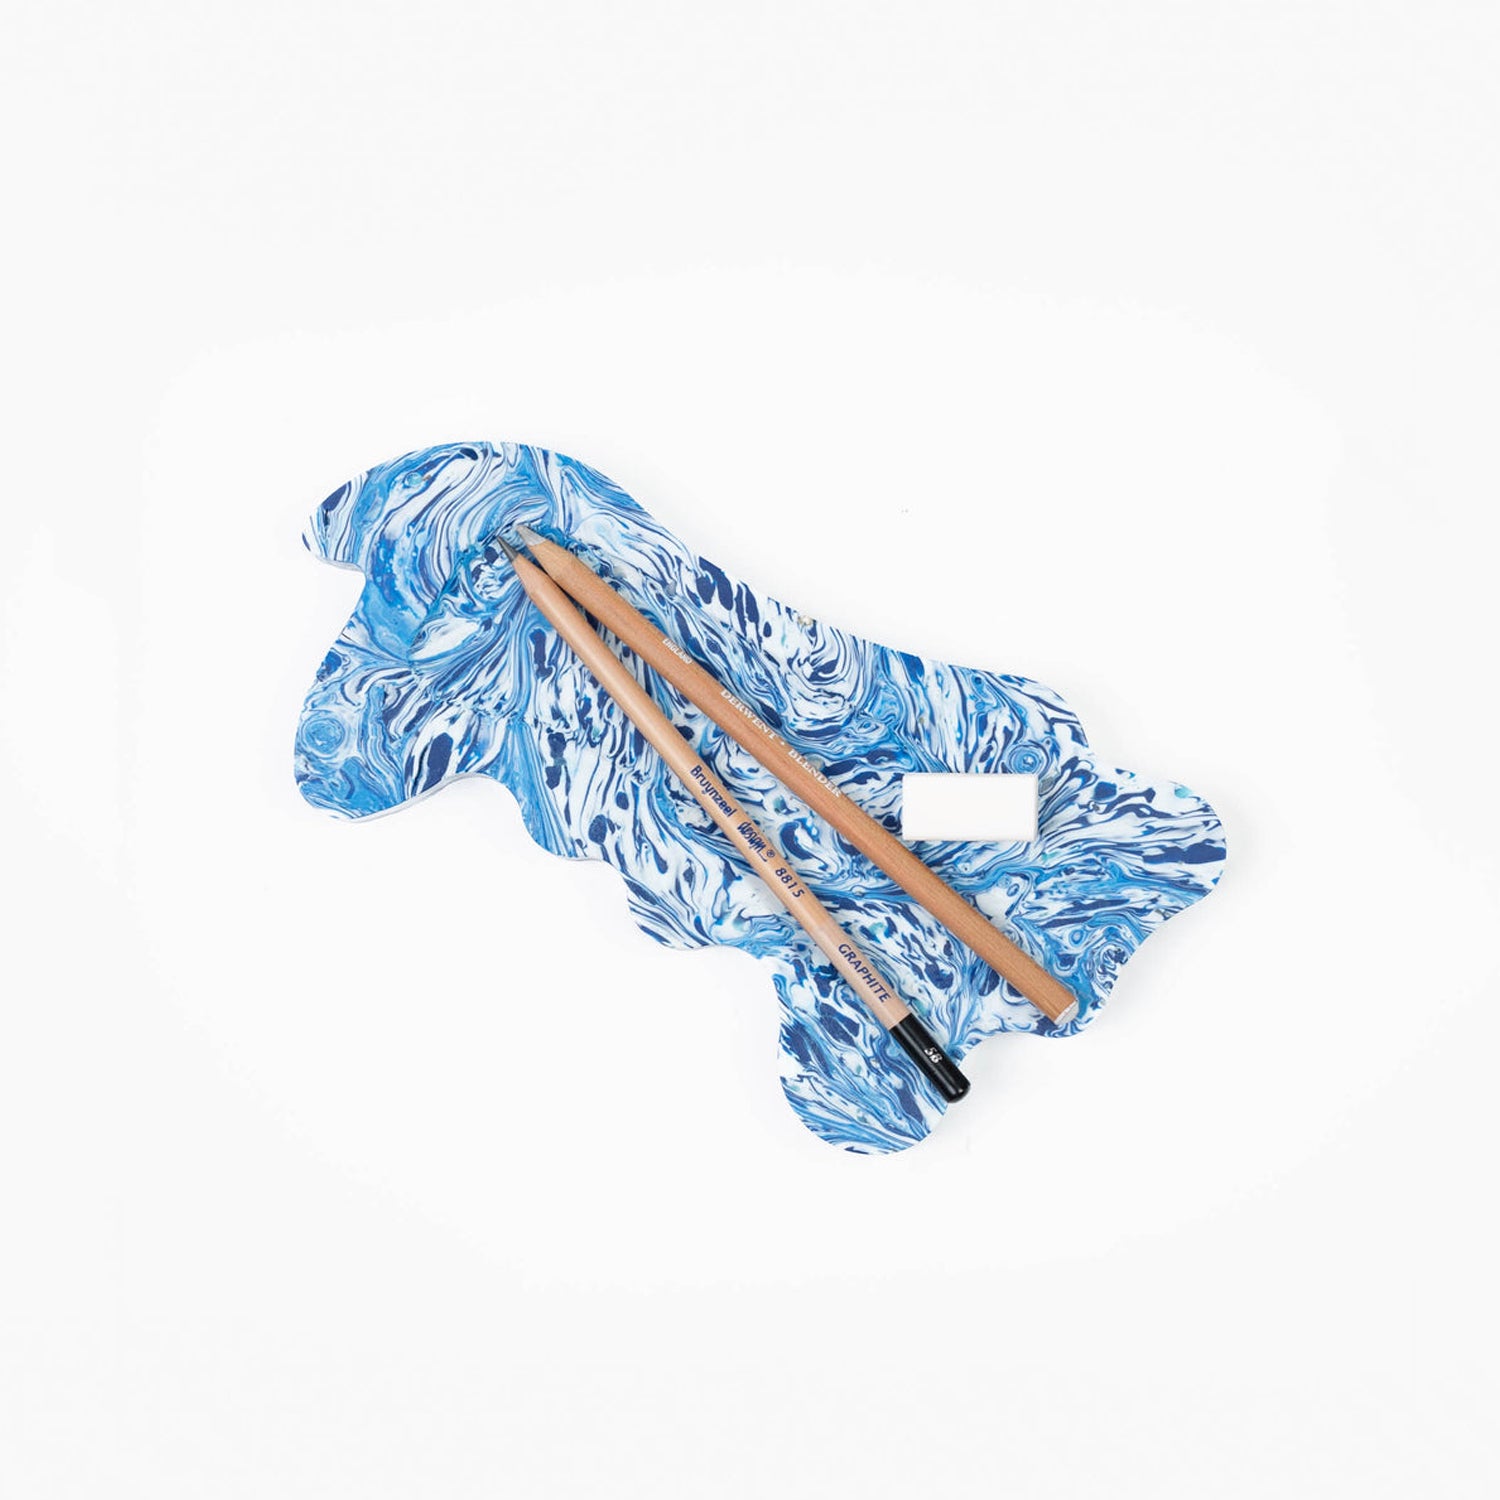 [SPACE AVAILABLE] MELTED STRUCTURES DESK TRAY _ BLUE WAVE